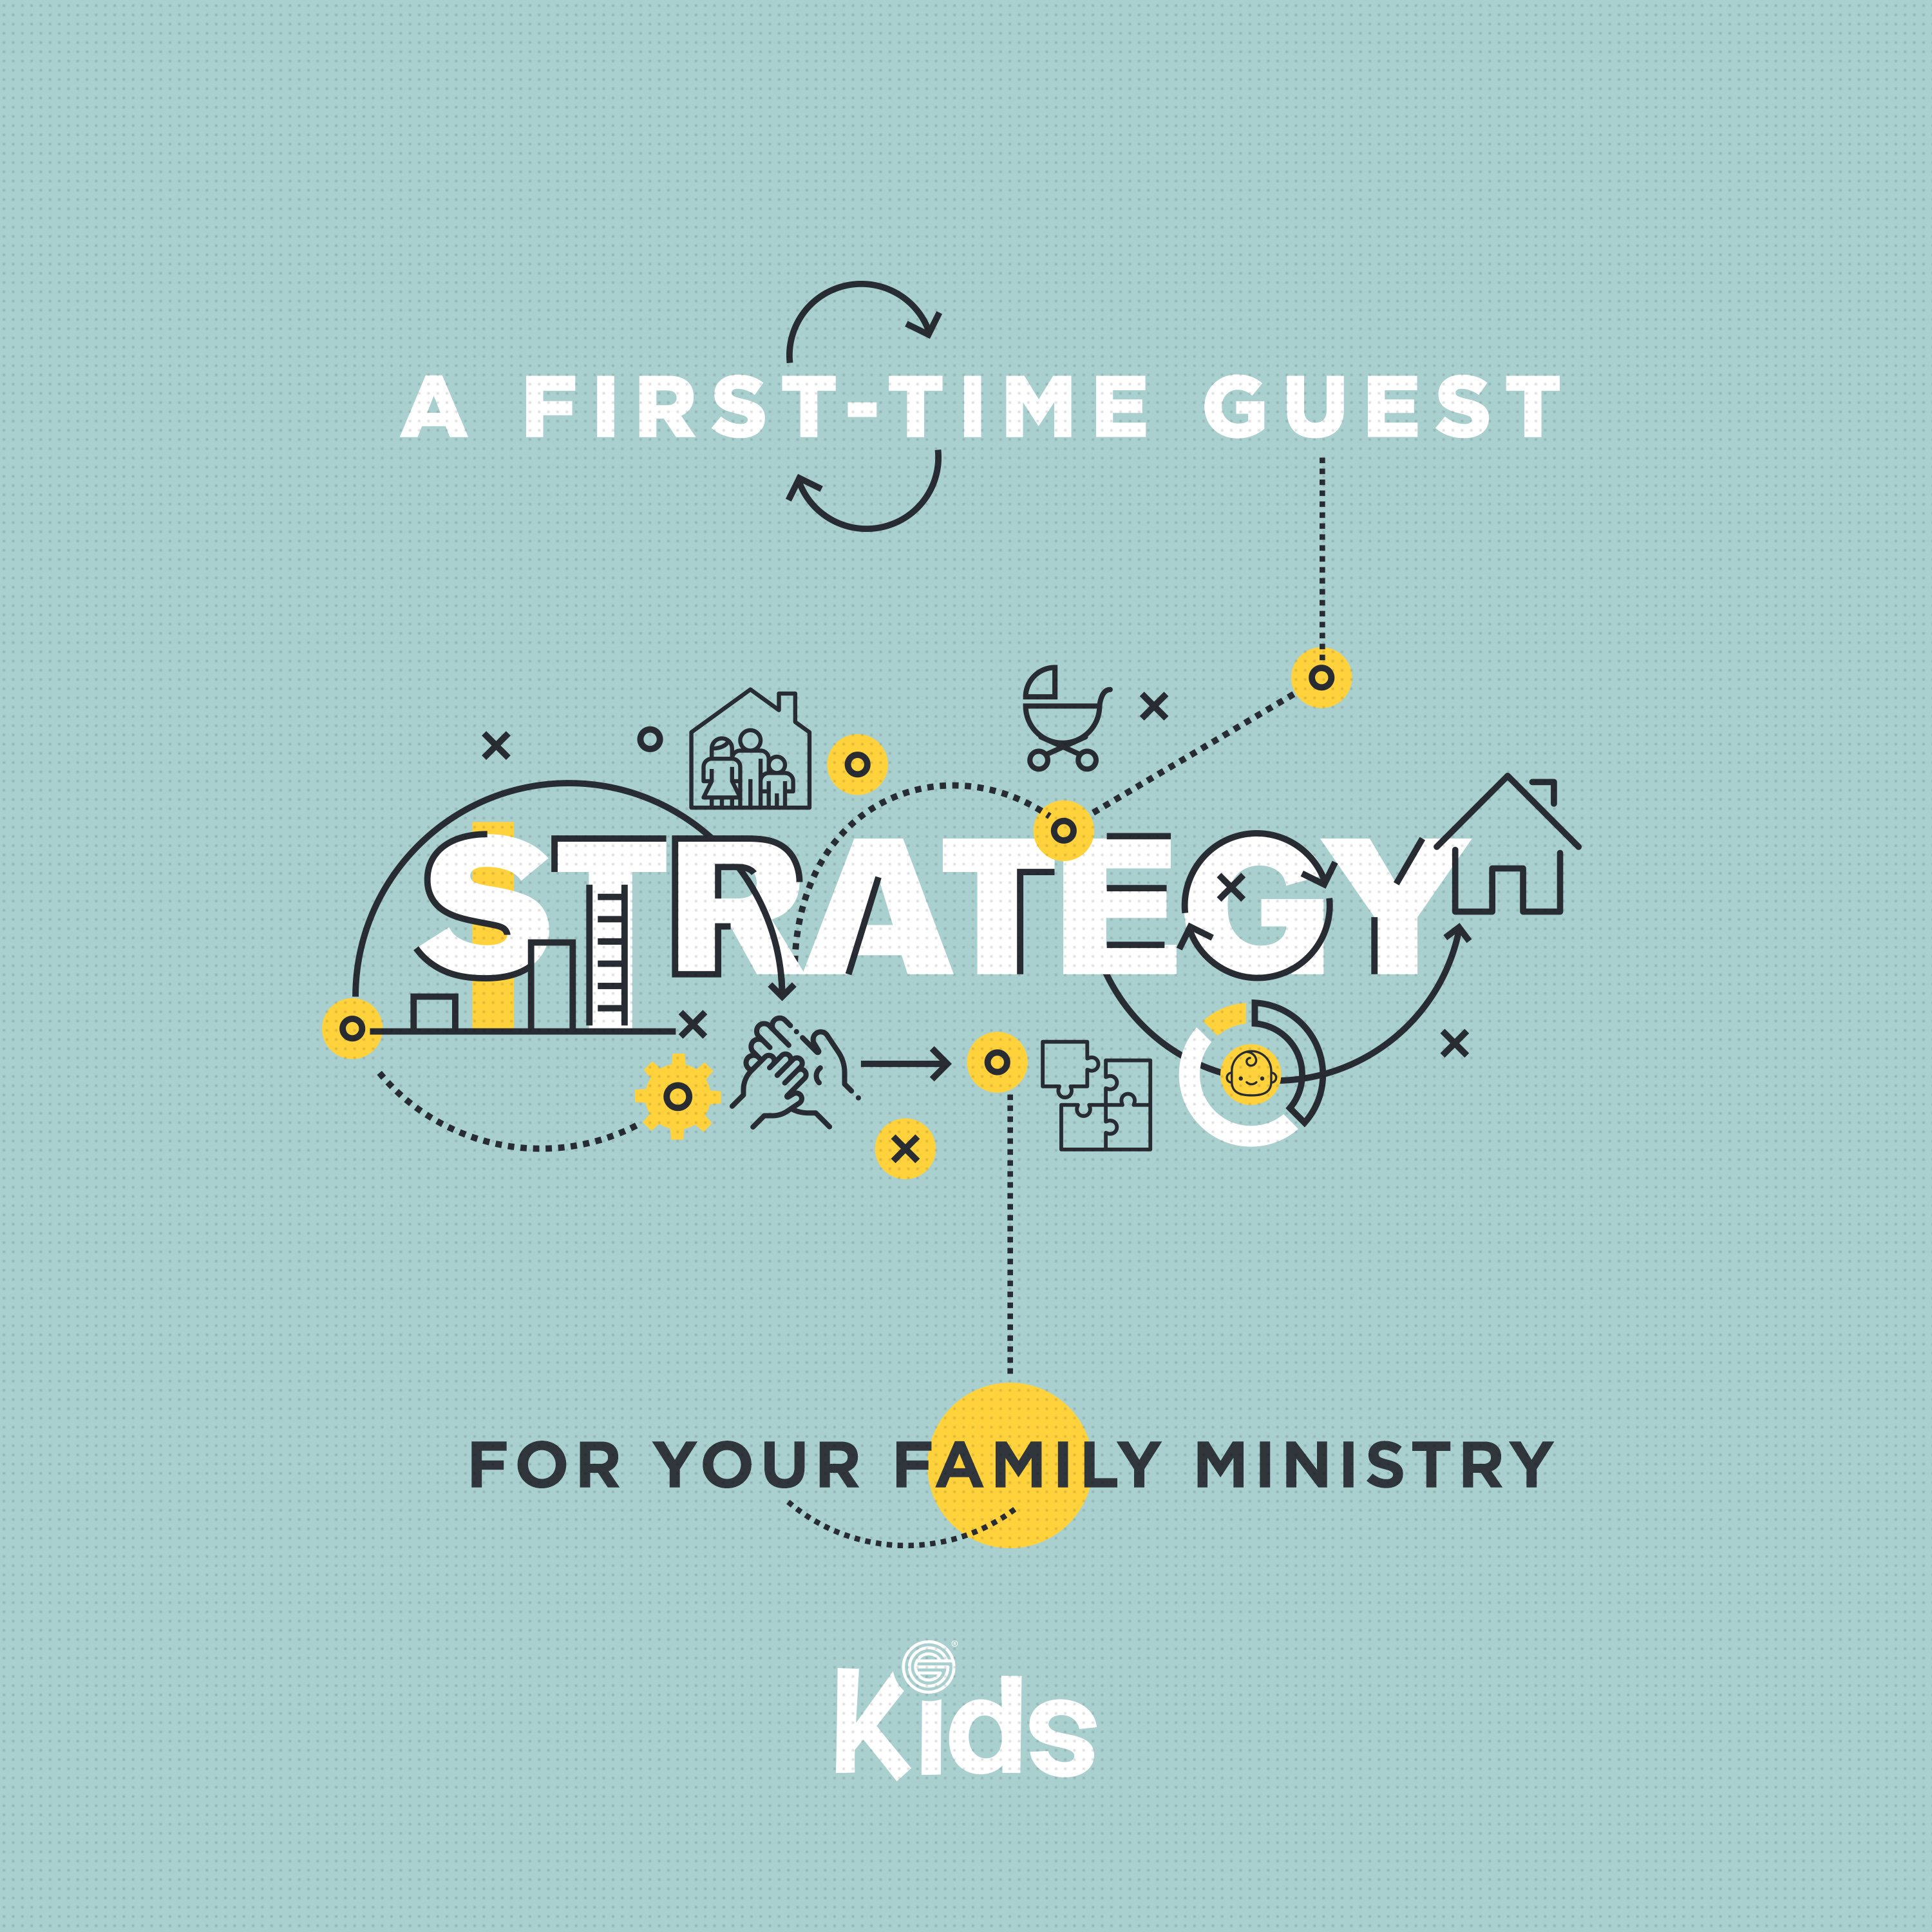 A First-Time Guest Strategy for your Family Ministry